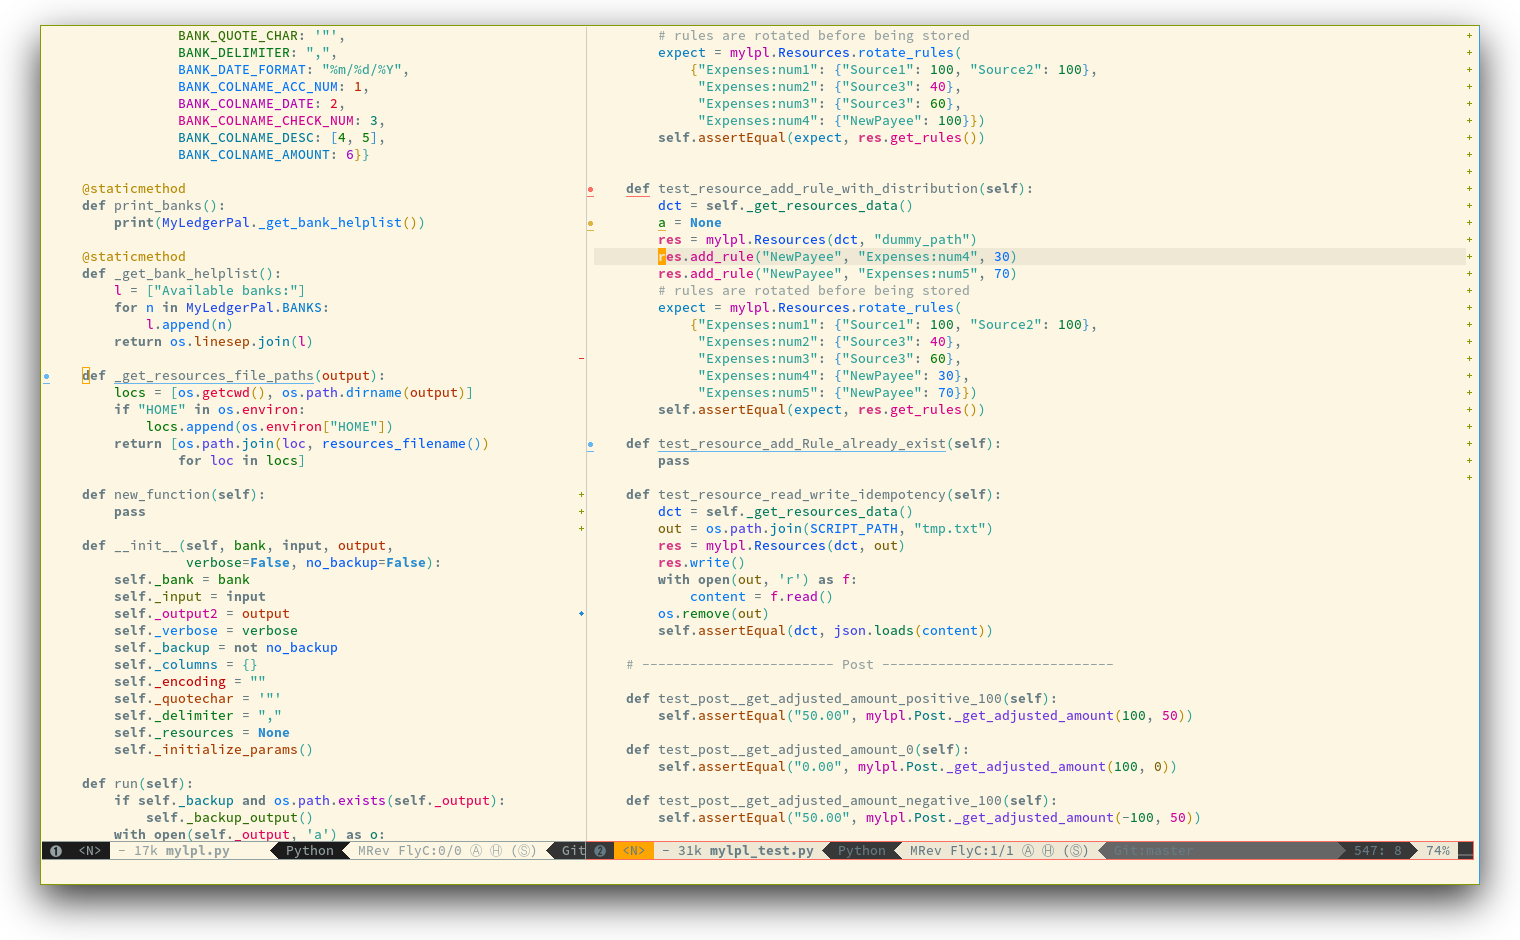 /TakeV/spacemacs/media/commit/70d4c2c784e793352b17294ccca3f934a164cd56/layers/colors/img/theme-tweaks-python.png